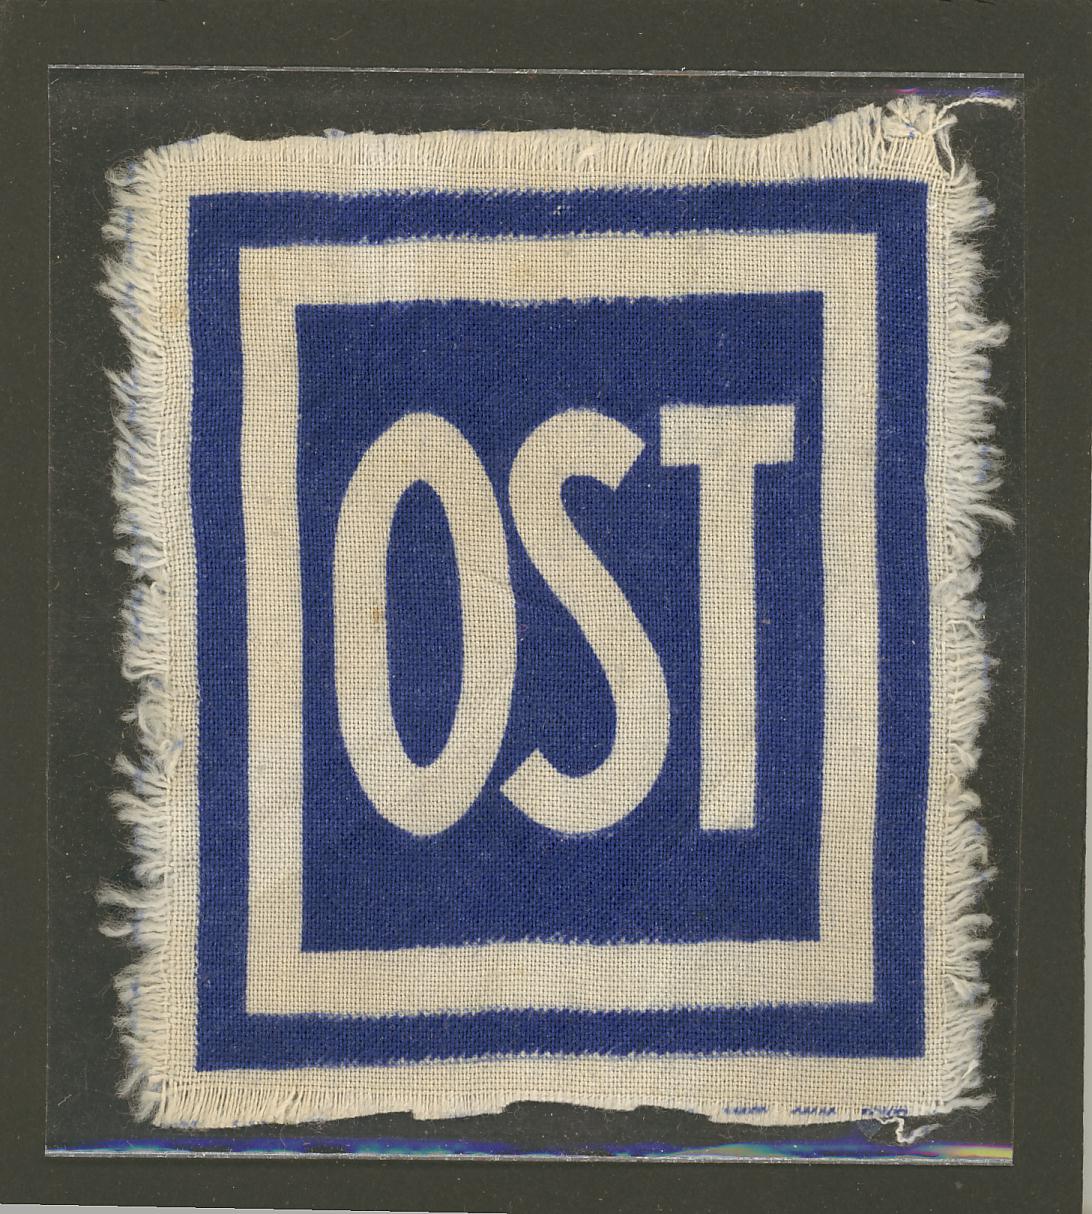 Patch used by Nazi Germany to identify forced laborers from “the East” (OST-Arbeiter). Cloth.